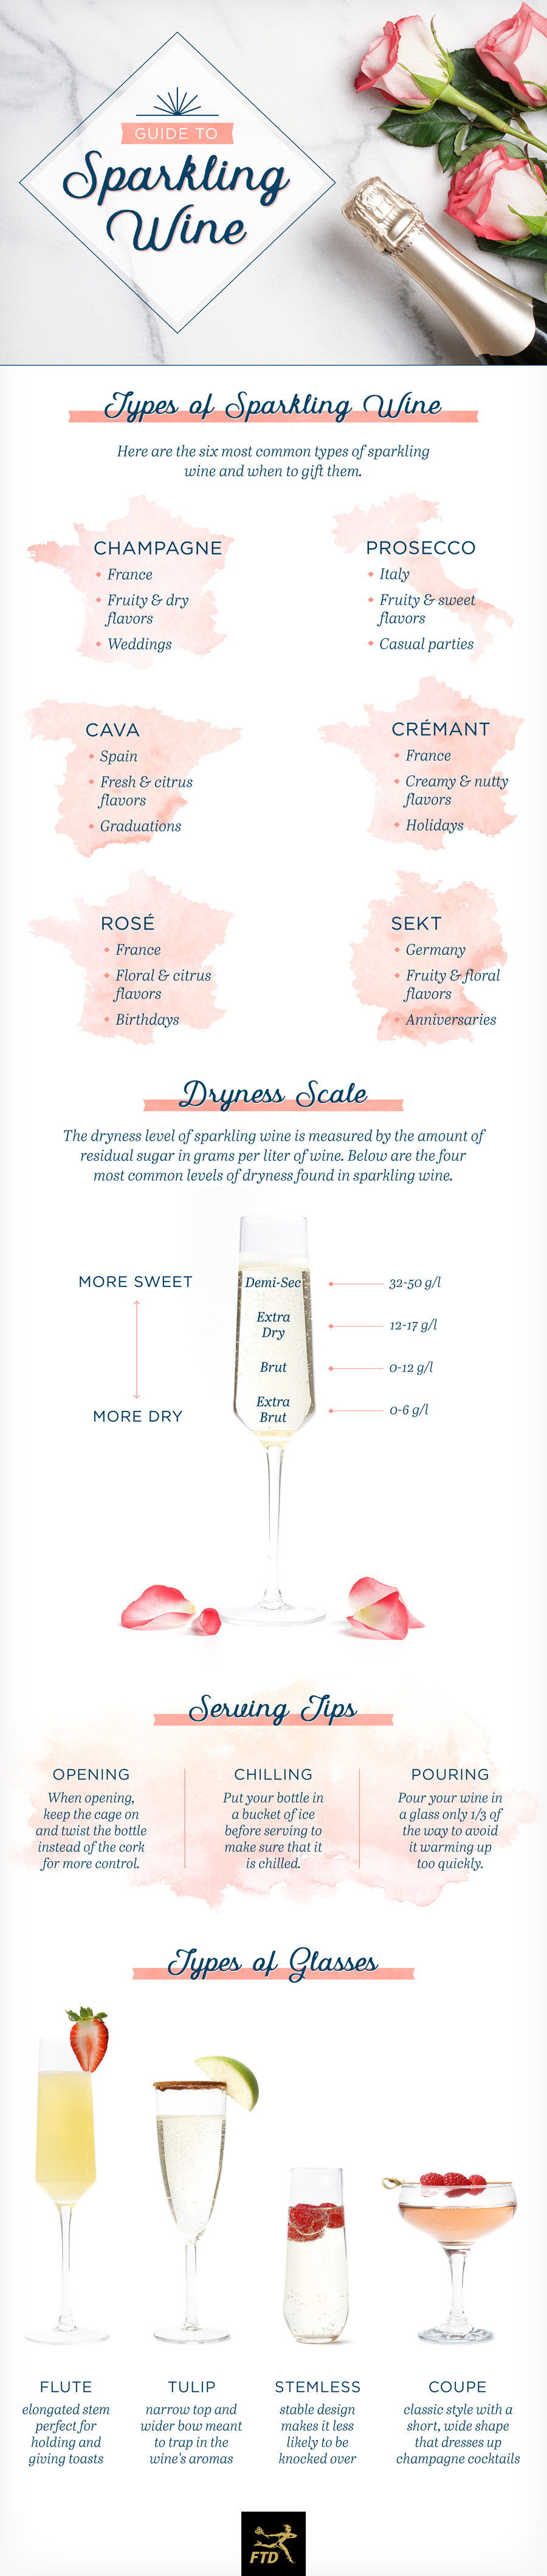 Guide to Sparkling Wine